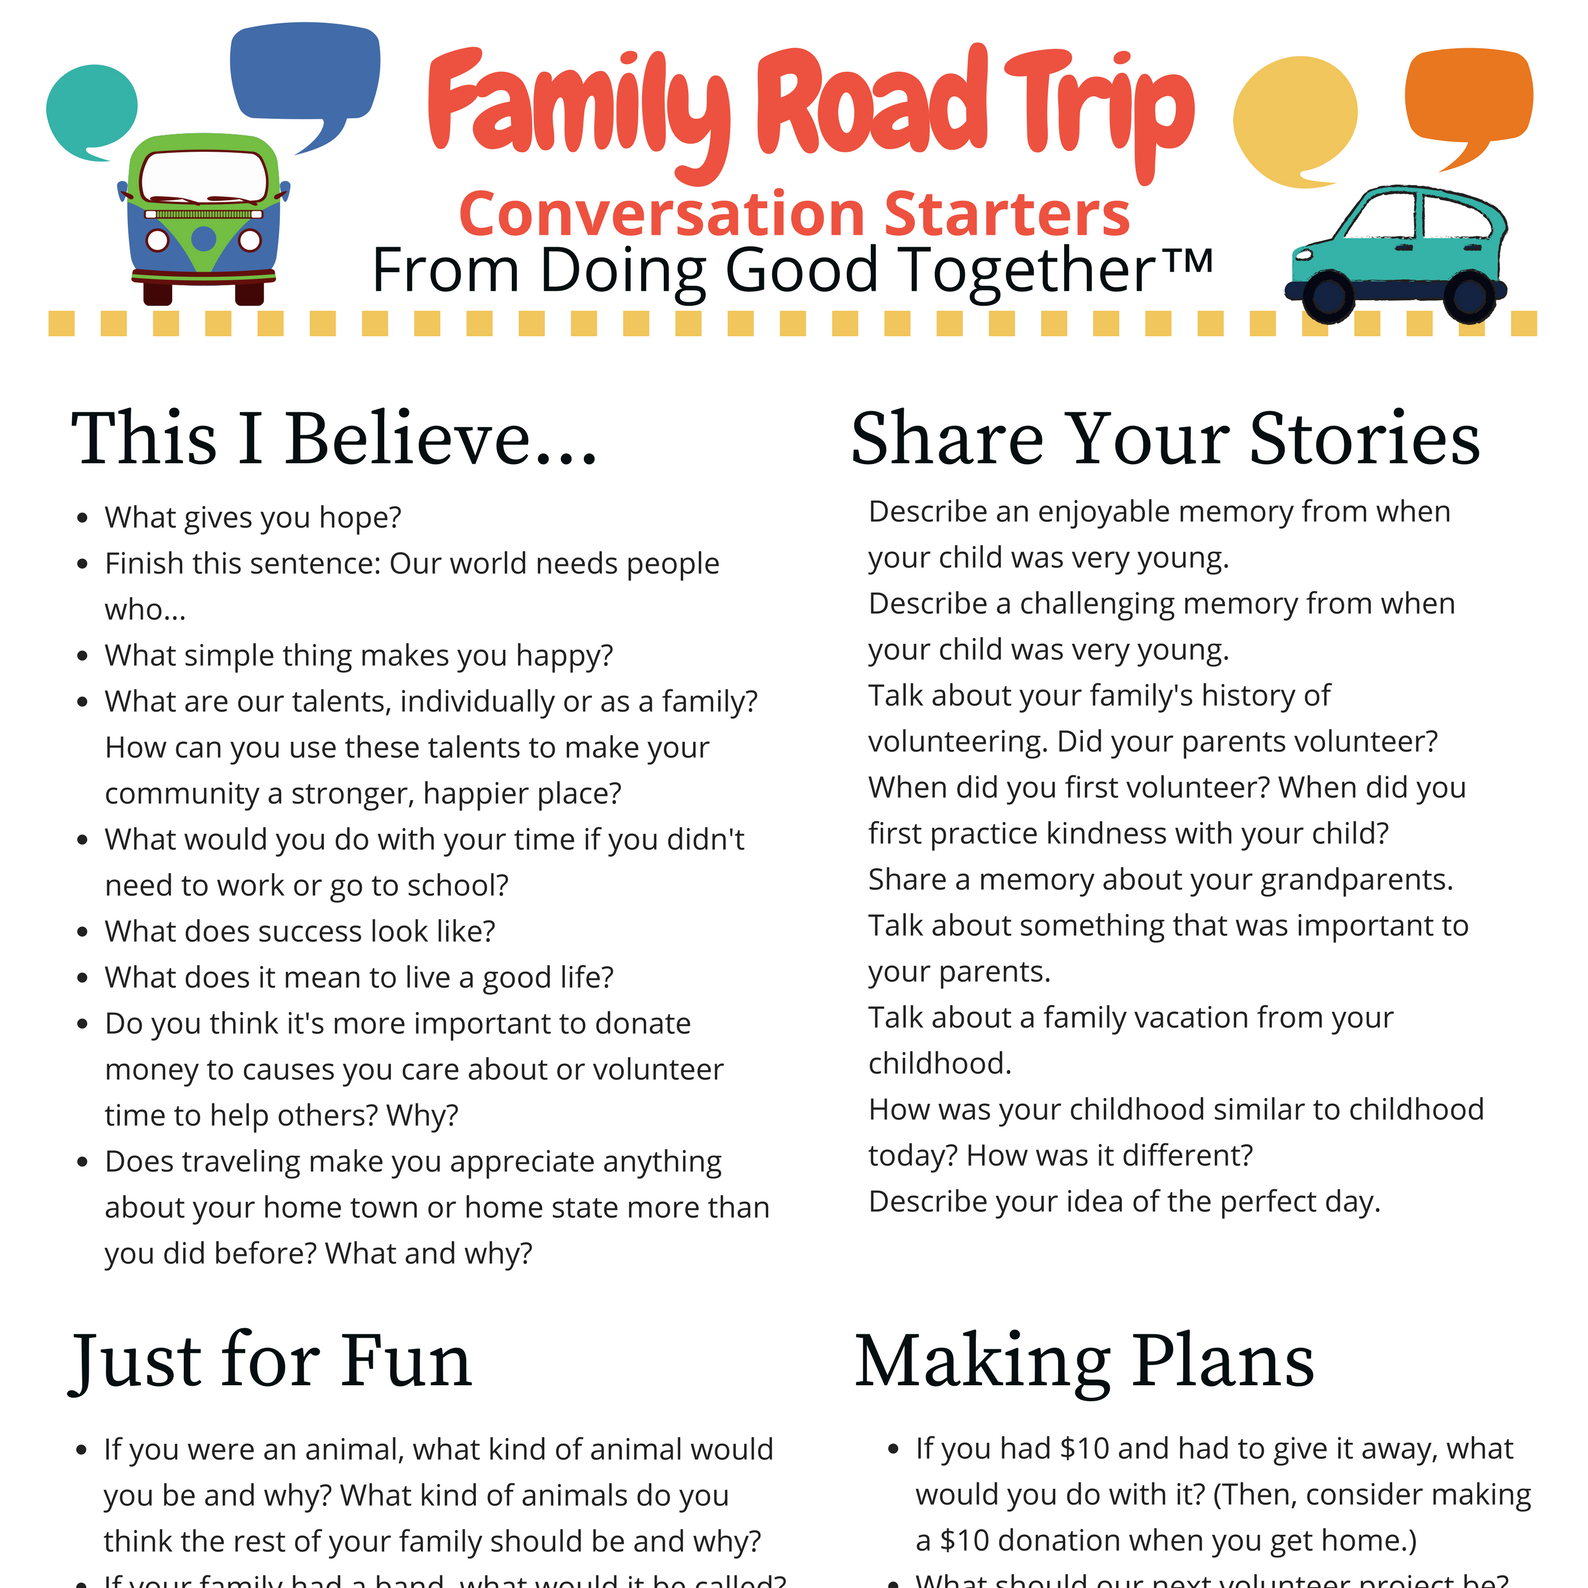 Family Road Trip Conversation Starters